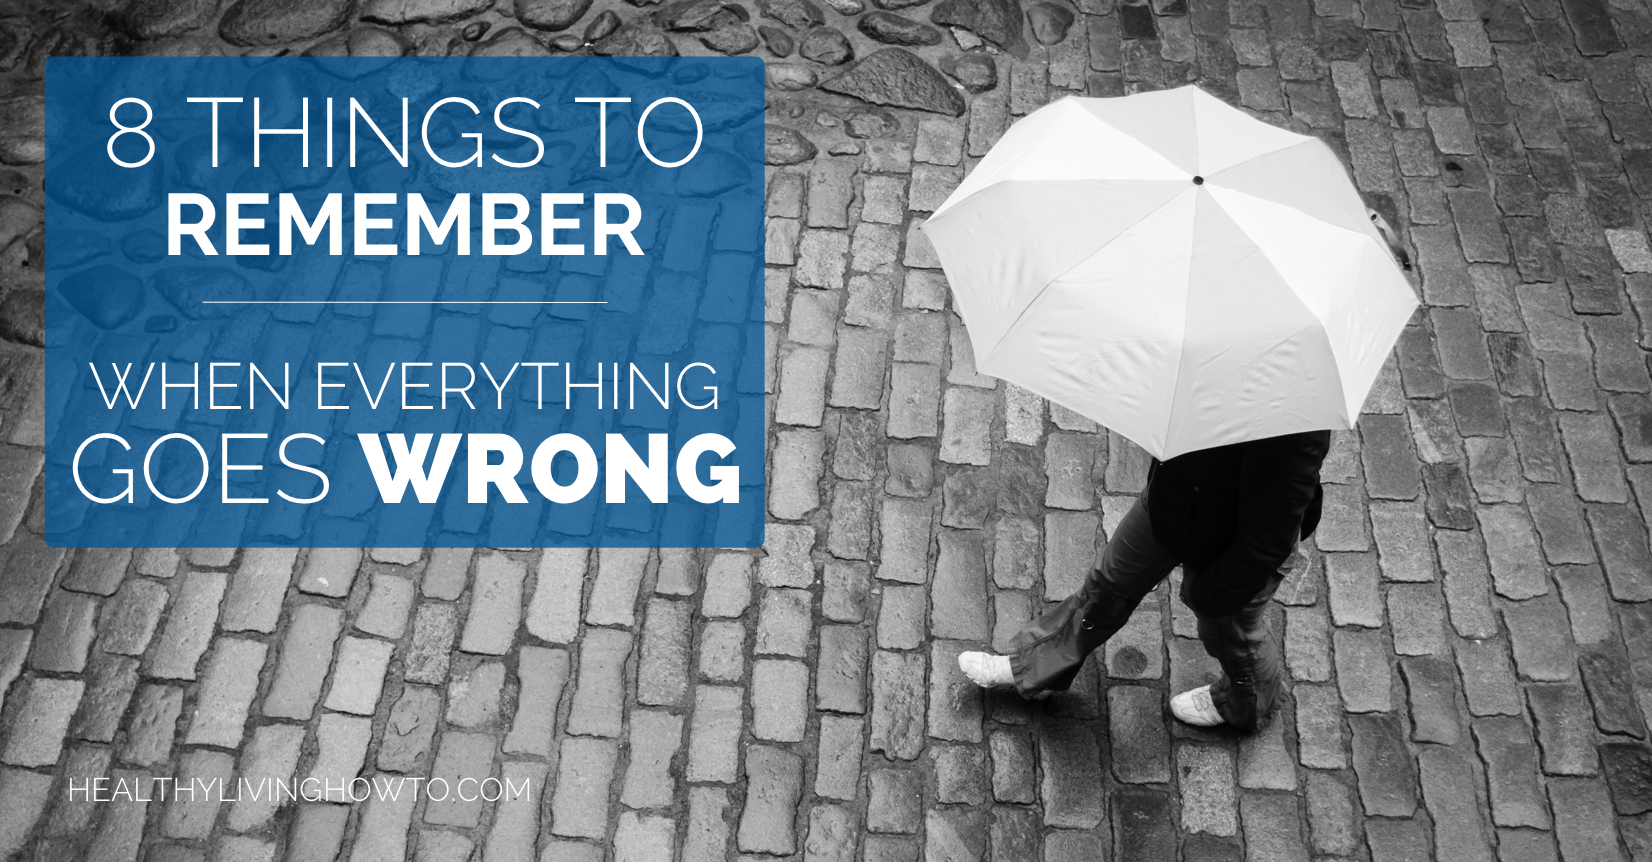 8 Things To Remember When Everything Goes Wrong | healthylivinghowto.com